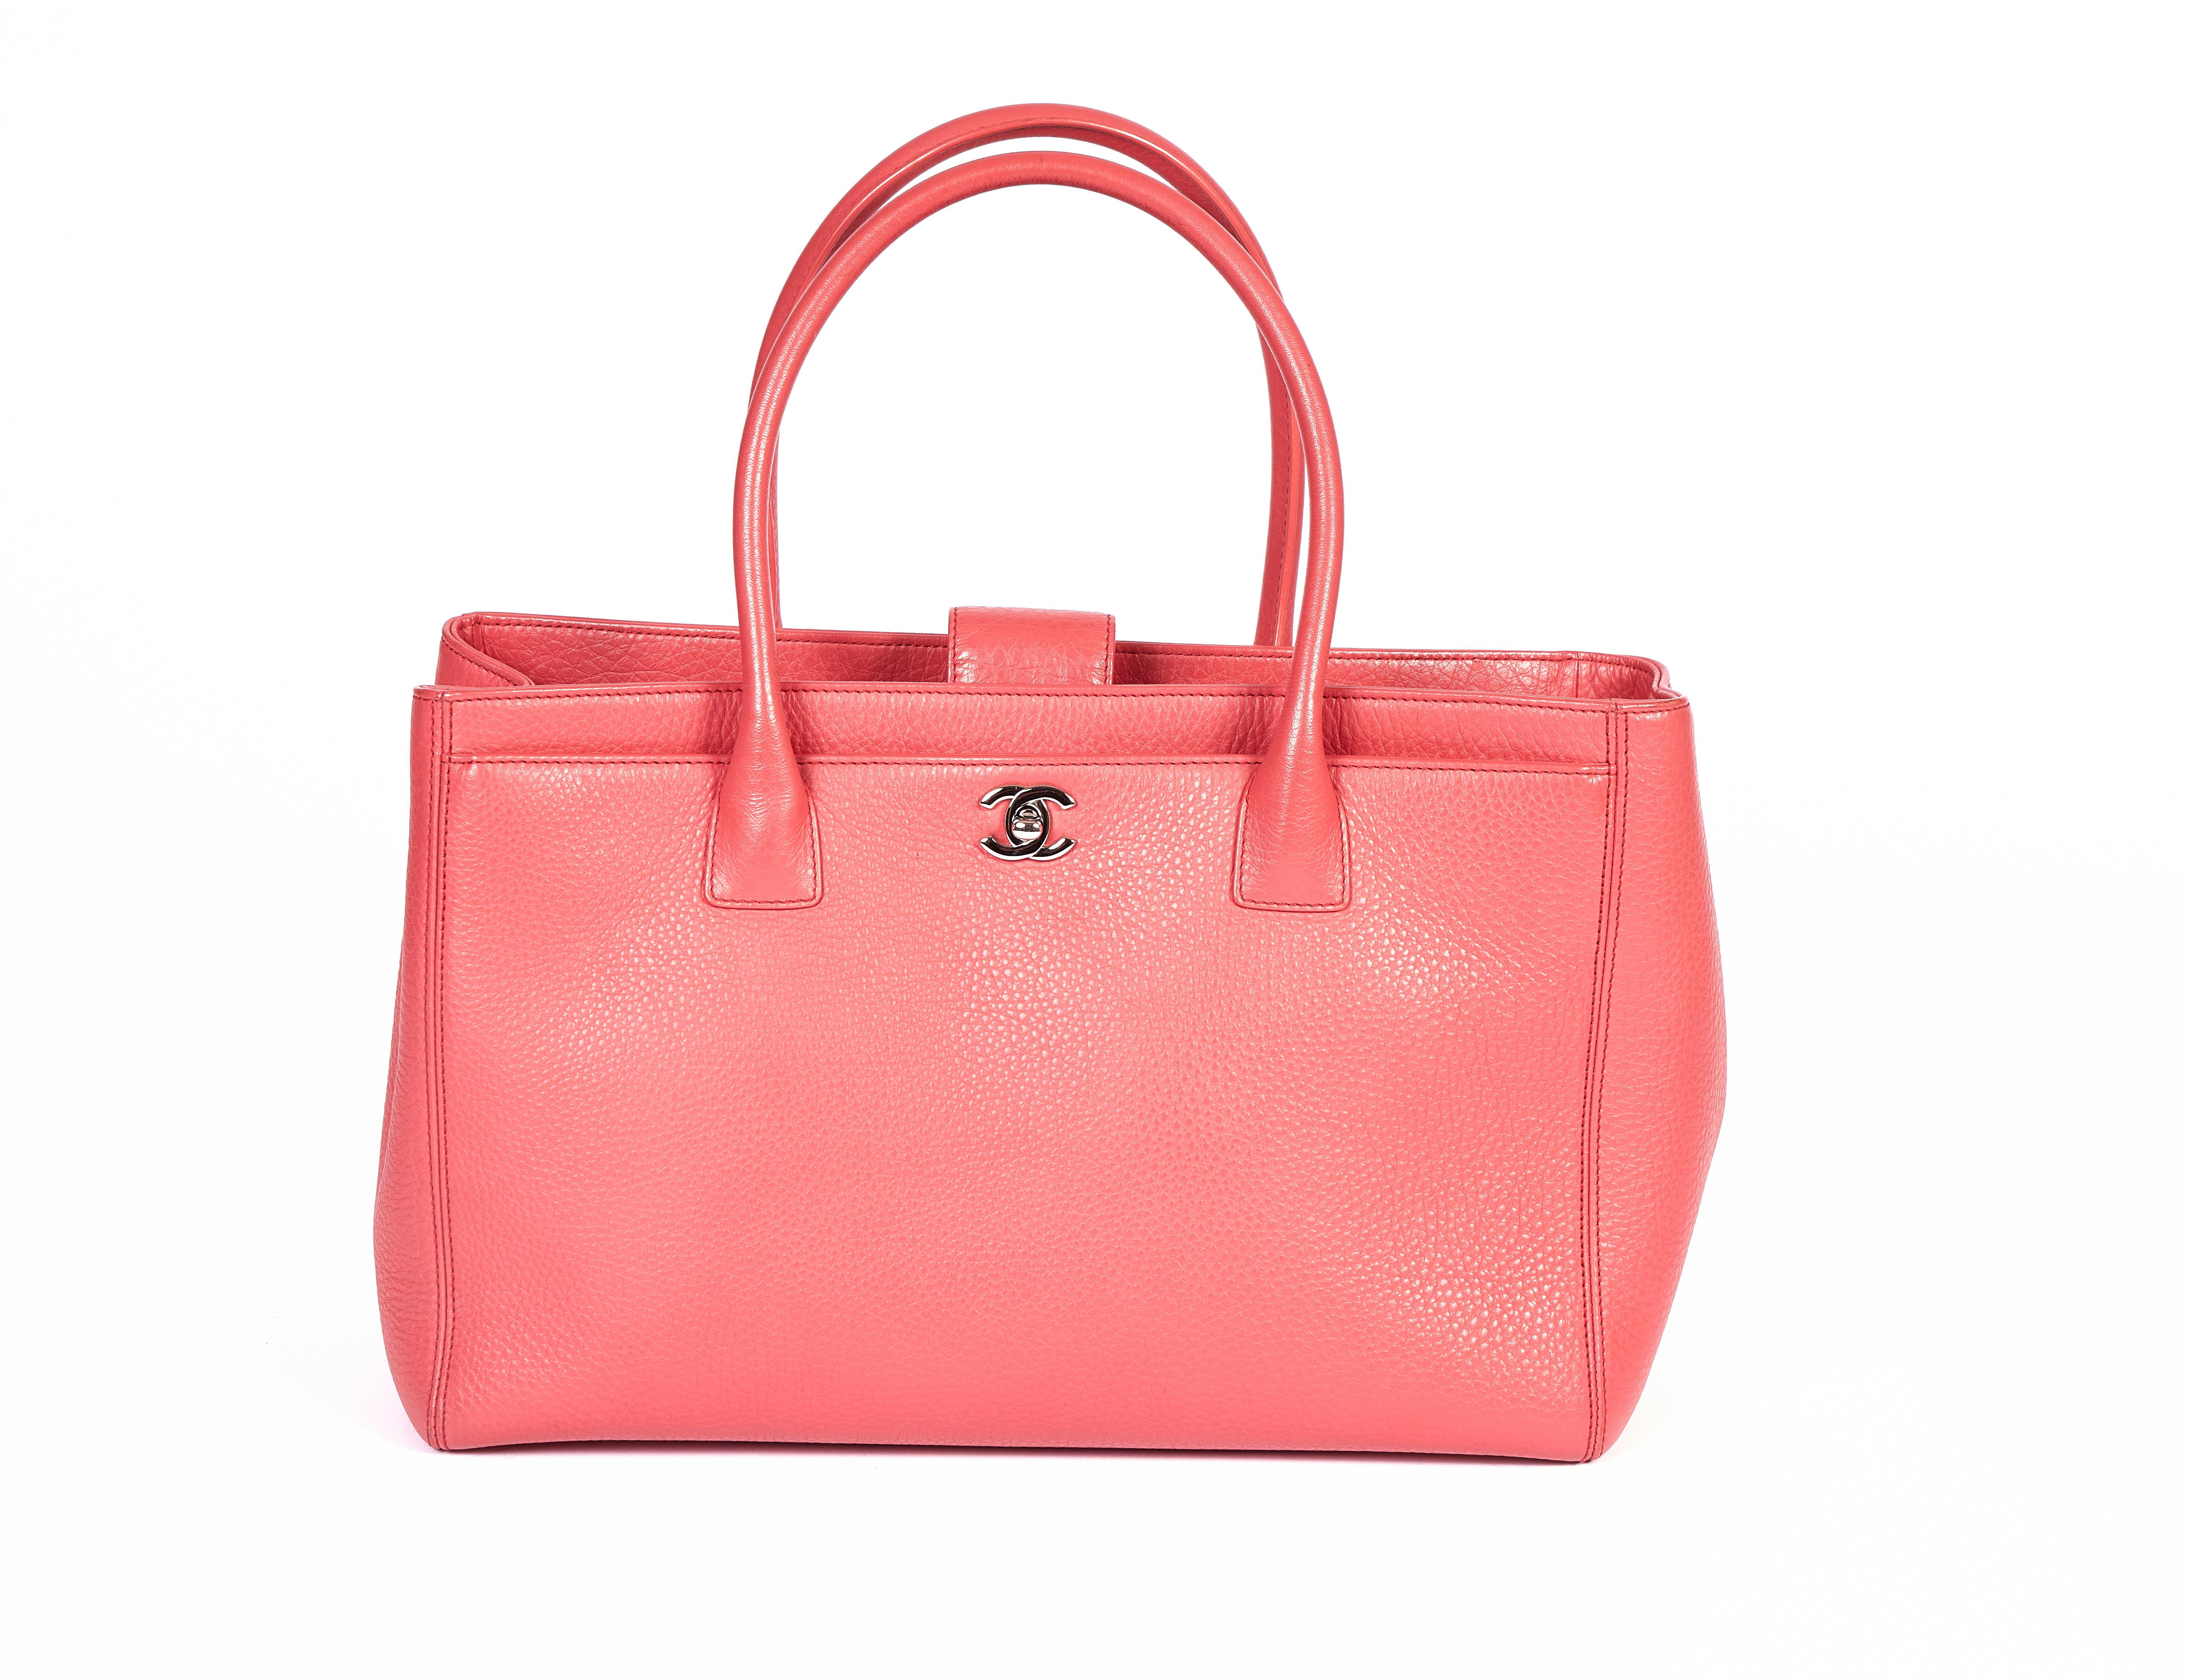 This beautiful City bag from Chanel comes in a coral color which looks good with a business outfit as well as jeans. The handles have a drop of 7 inches so you can also wear it over your shoulder. Detachable interior pouch and strap. It comes with